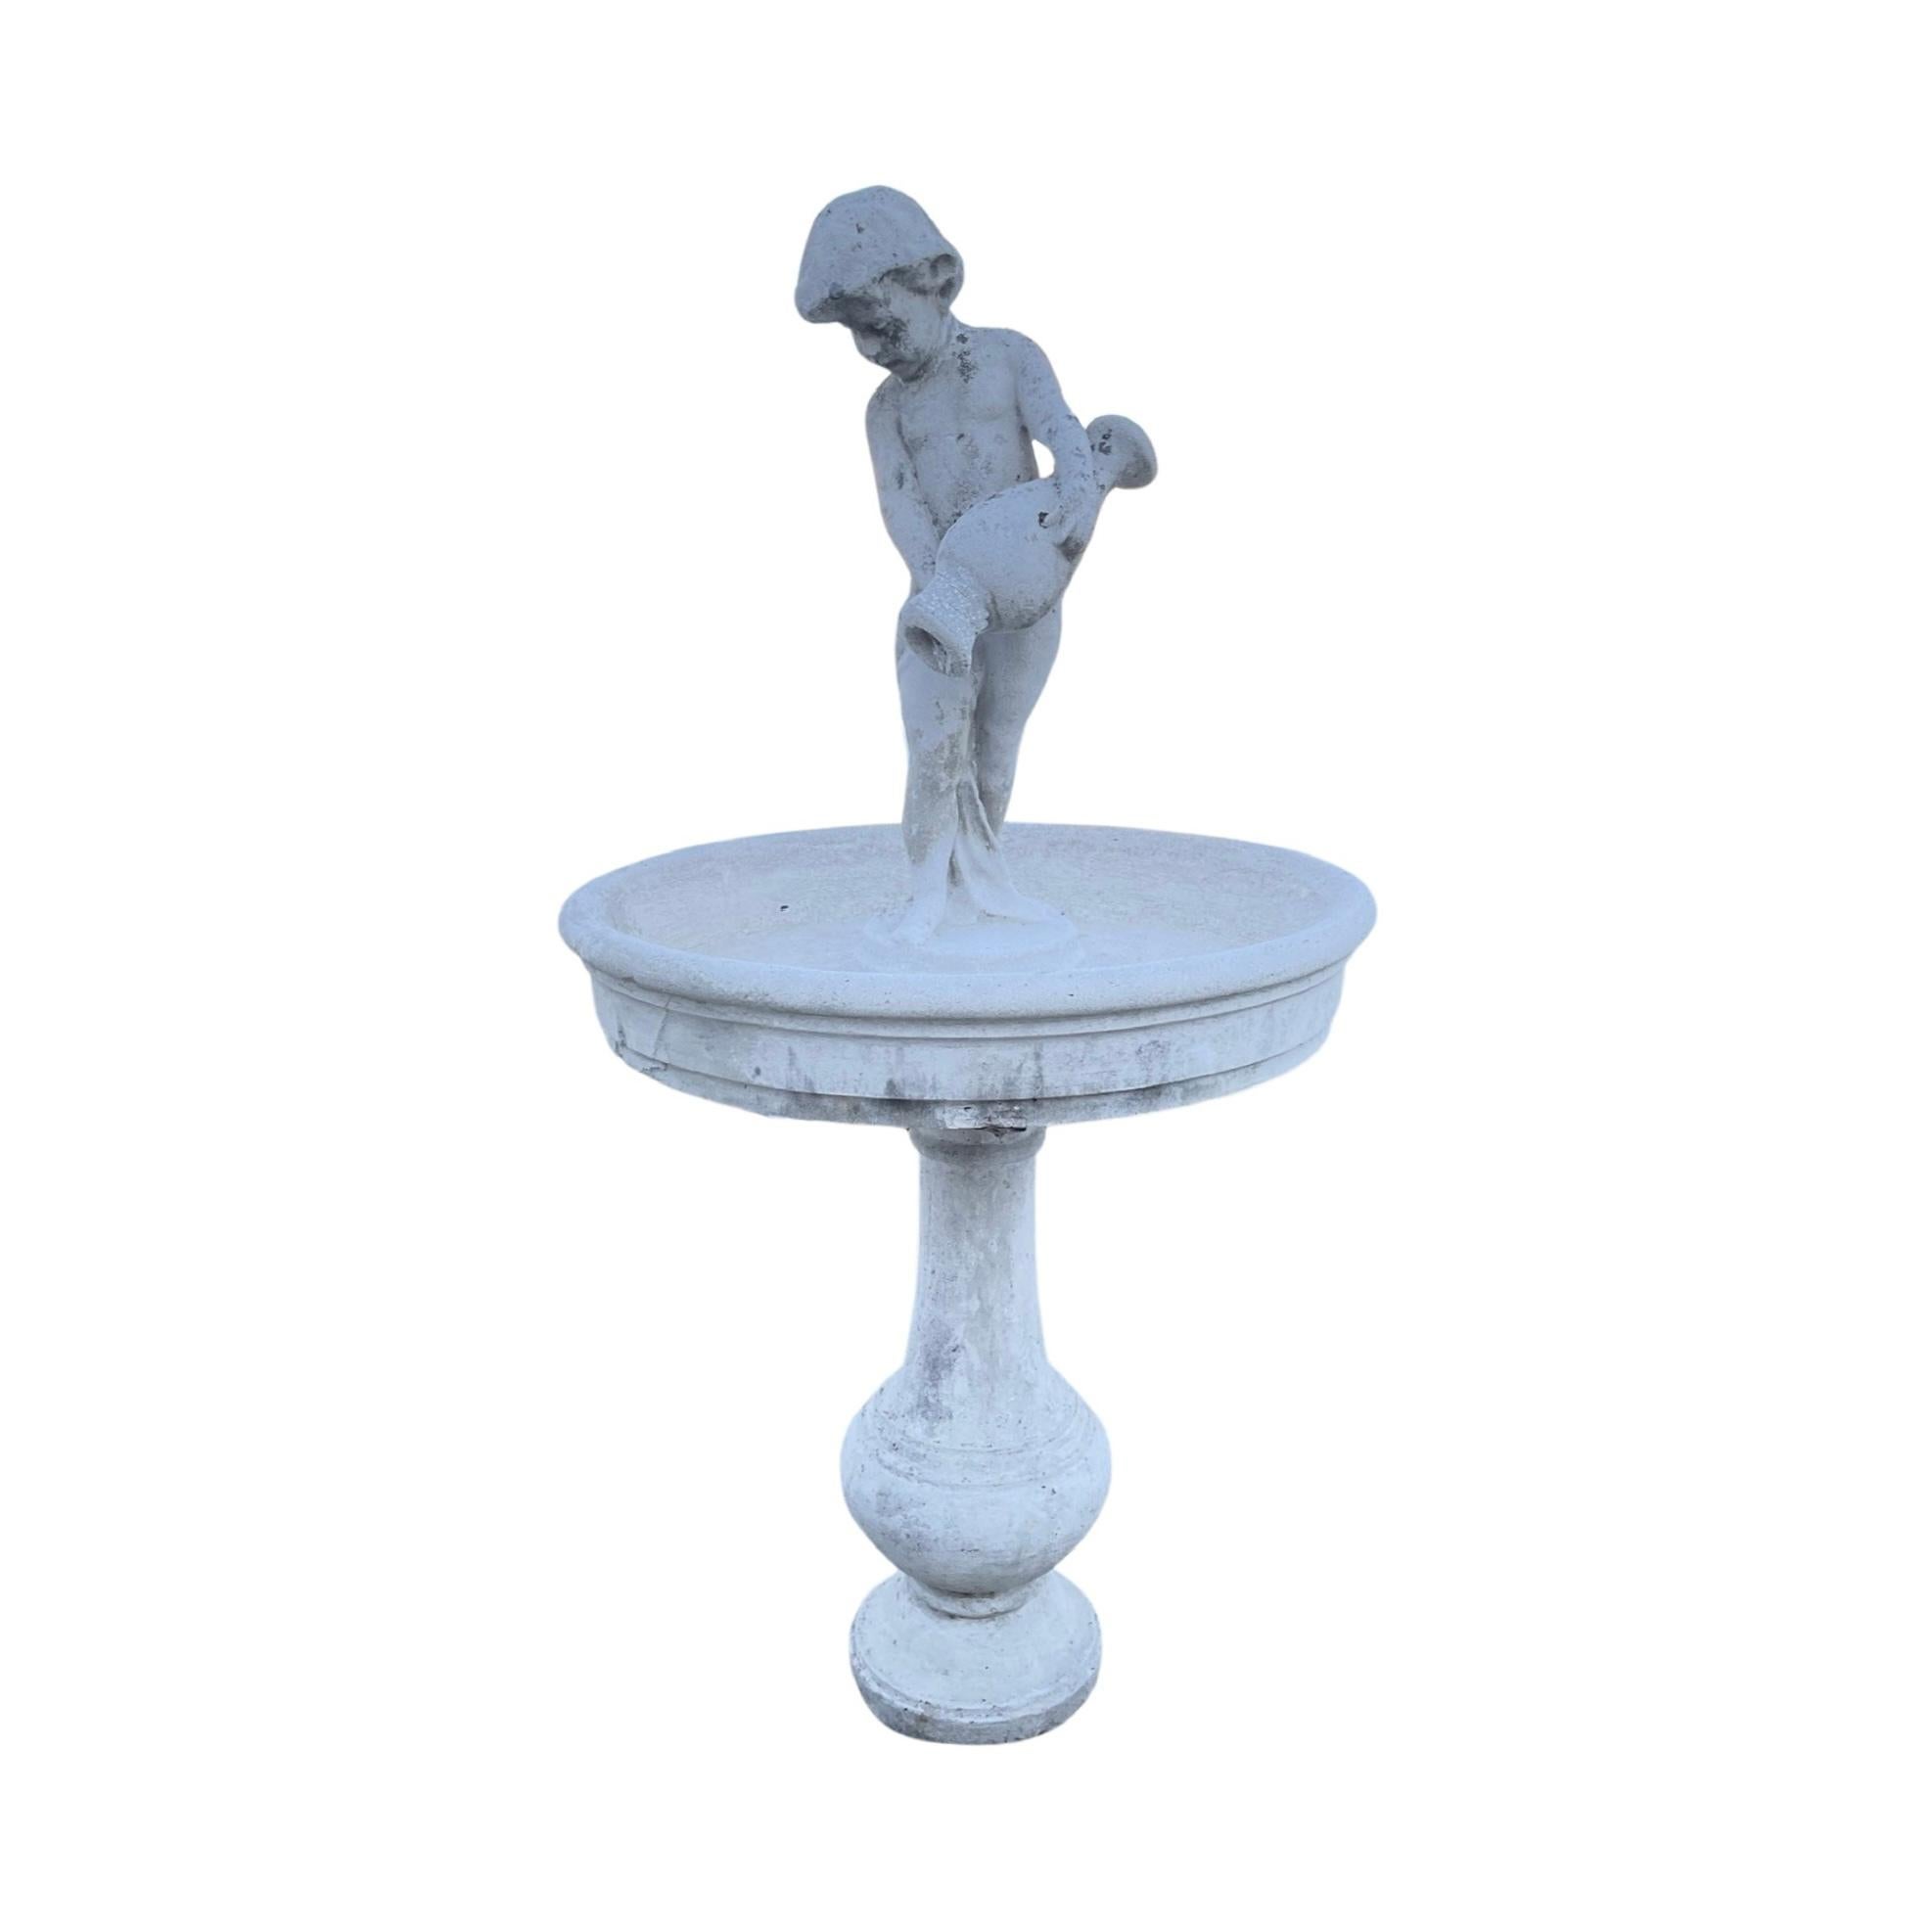 This 19th century Italian Cement Composite Central Fountain features a central-style basin for water overflow and a carved statue in the center, creating an elegant centerpiece for any garden. Its cement composition ensures durability and an